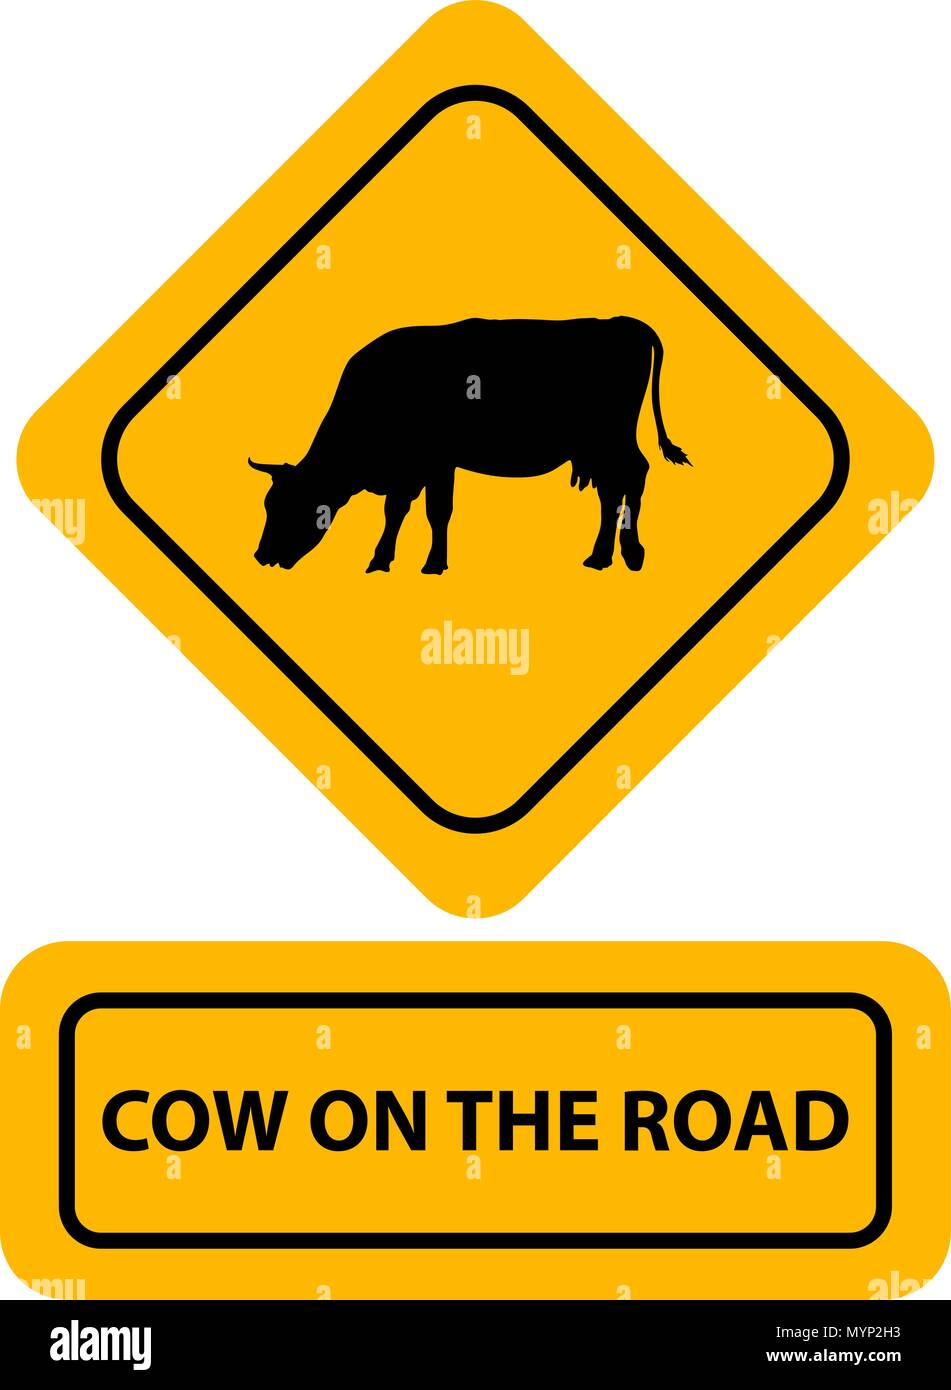 Cow sign on the road Stock Vector